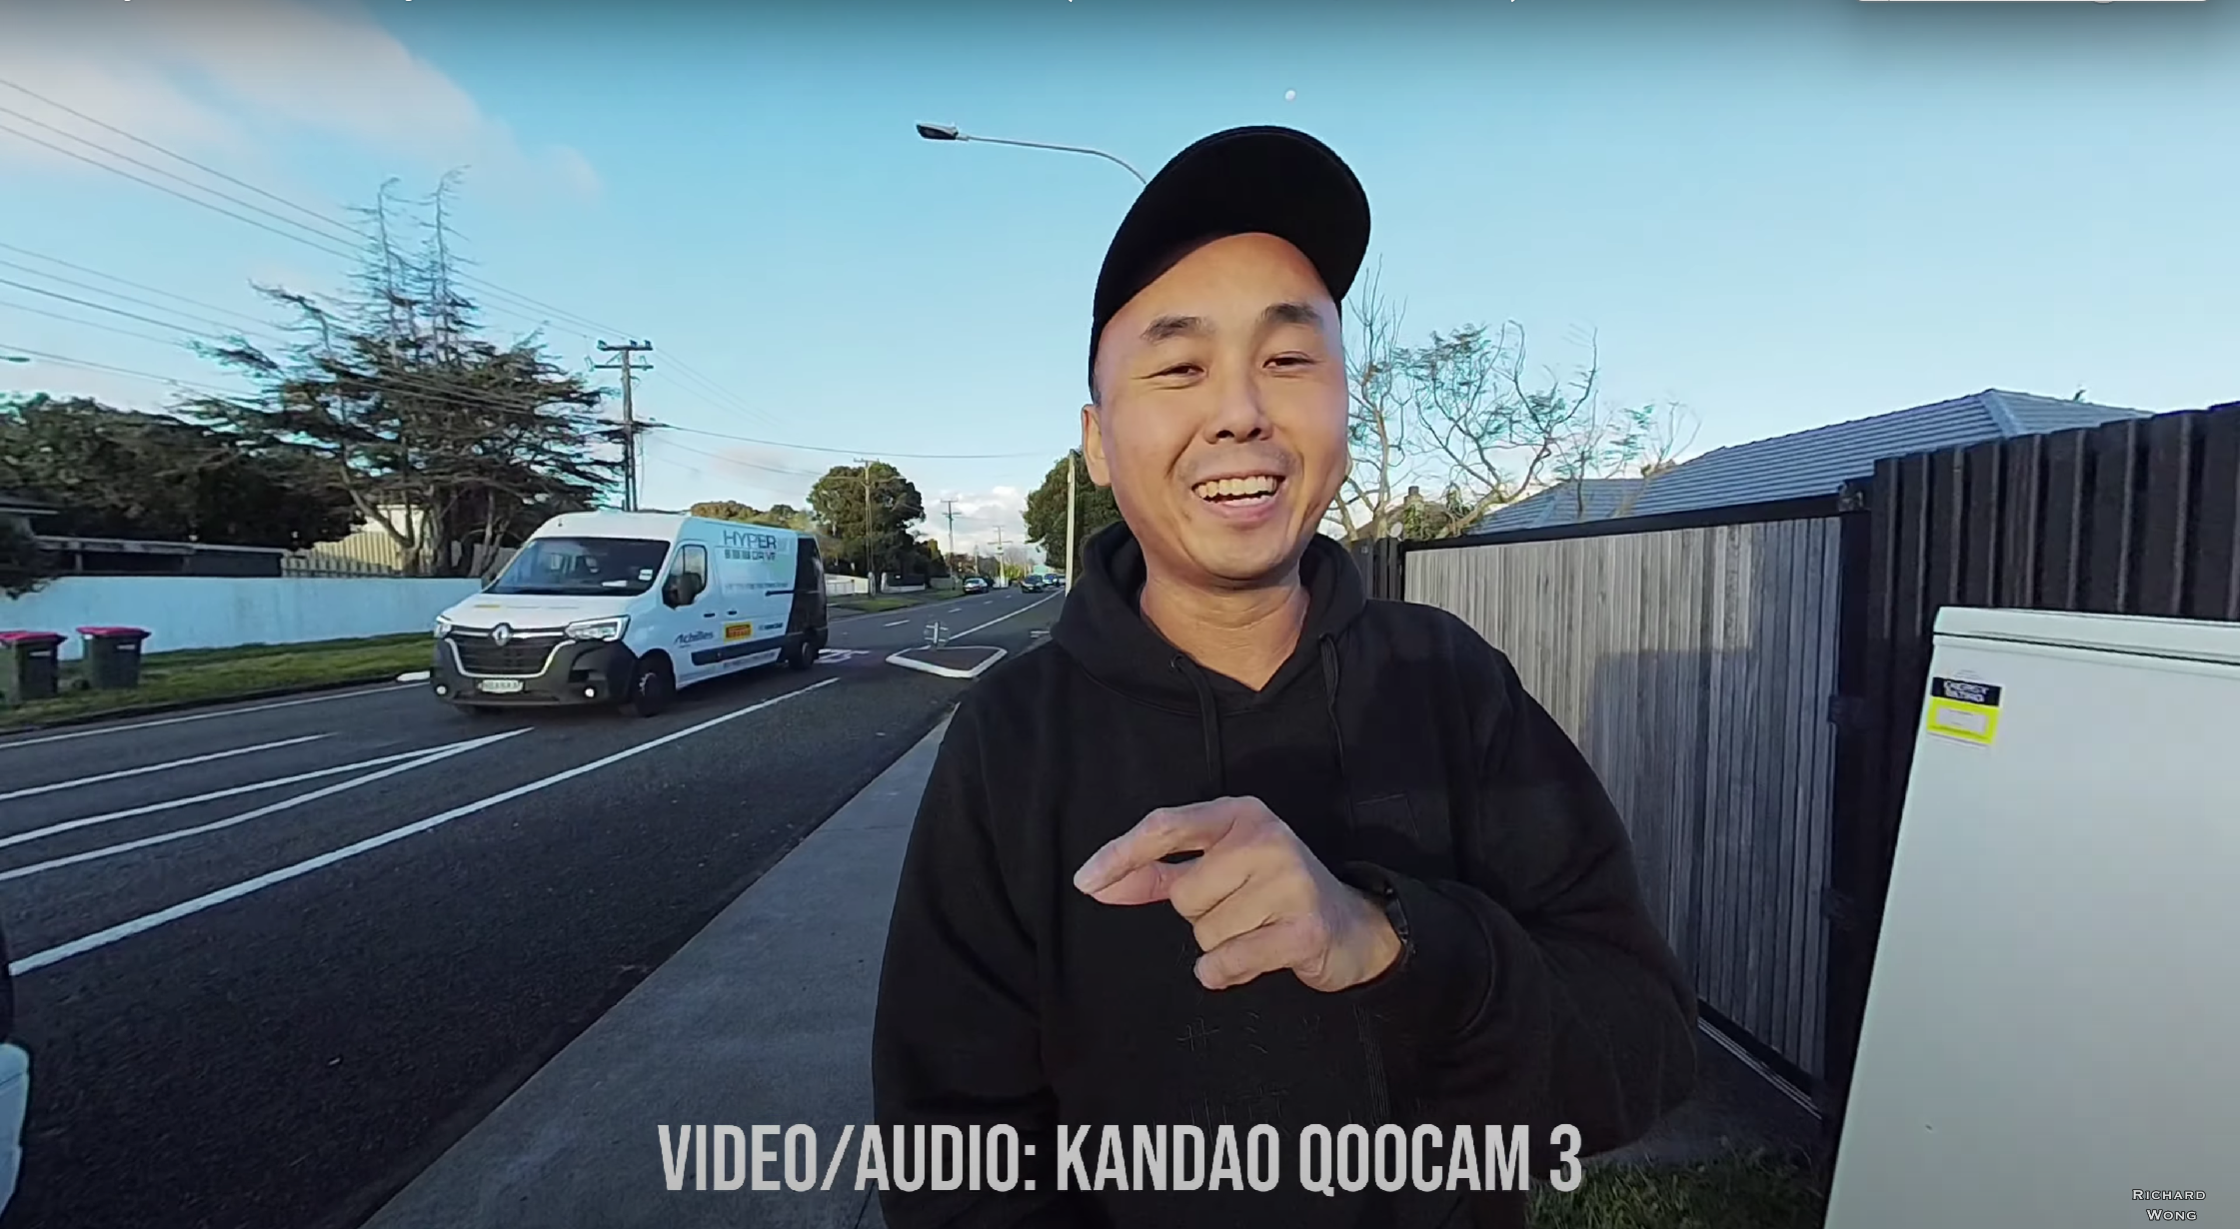 It's time to buy a 360 camera - Kandao QooCam 3 Review by Richard Wong